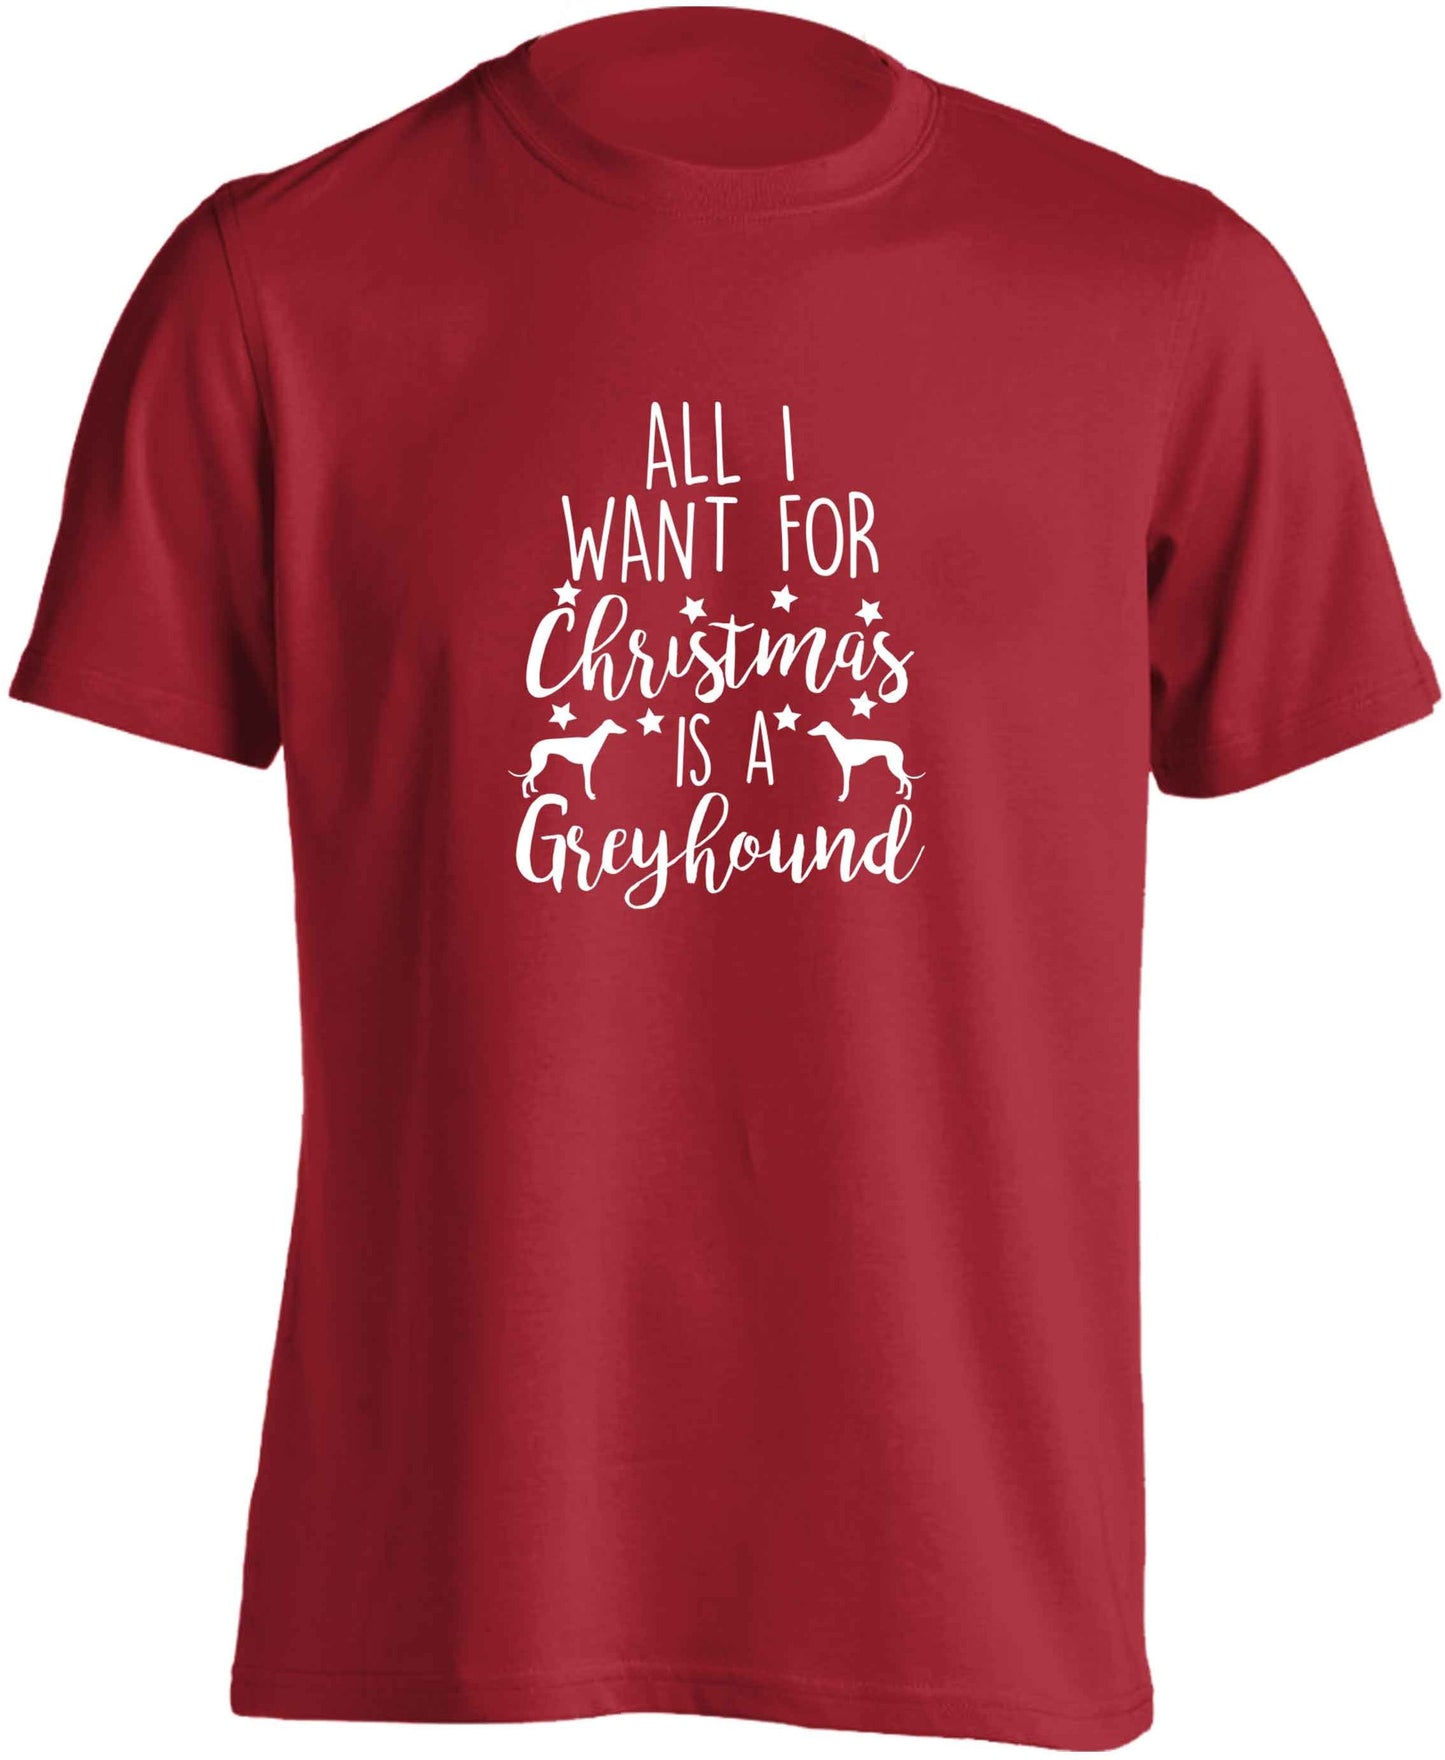 All I want for Christmas is a greyhound adults unisex red Tshirt 2XL